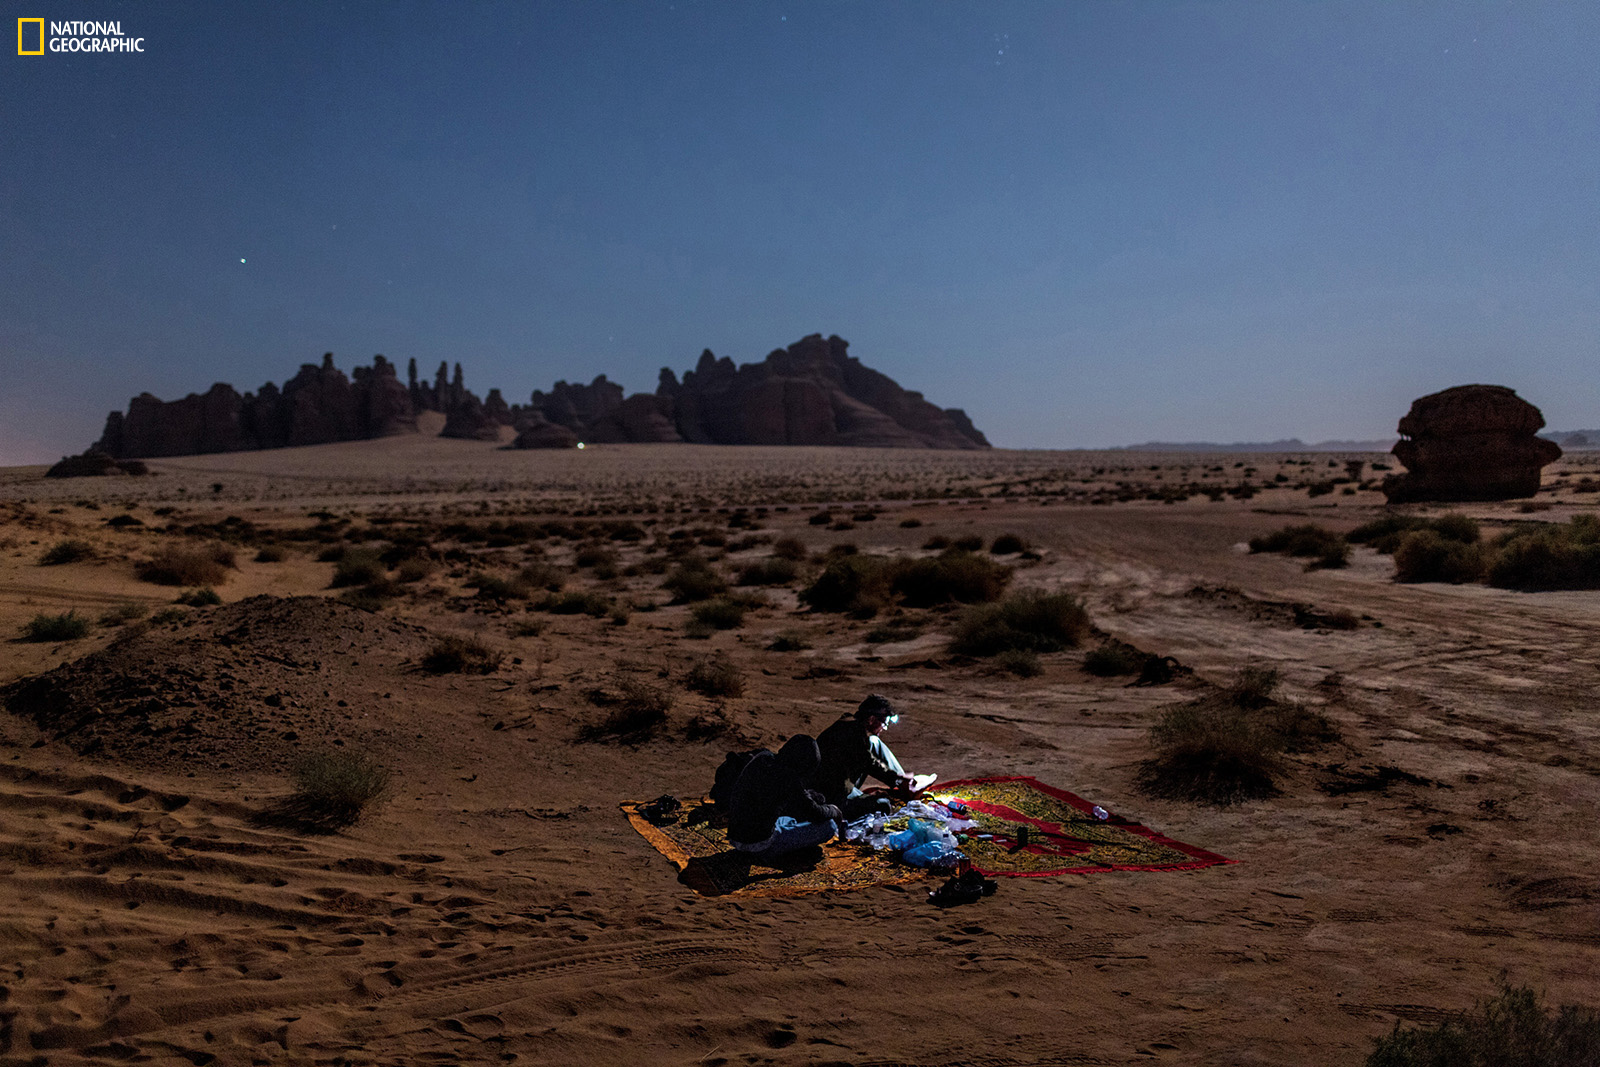 Surrounded by the ghosts of travelers who came before him, author Salopek camps amid 2,000-year-old Nabataean tombs at Madain Salih. Join the journey at outofedenwalk.org. Photograph by John Stanmeyer / National Geographic 